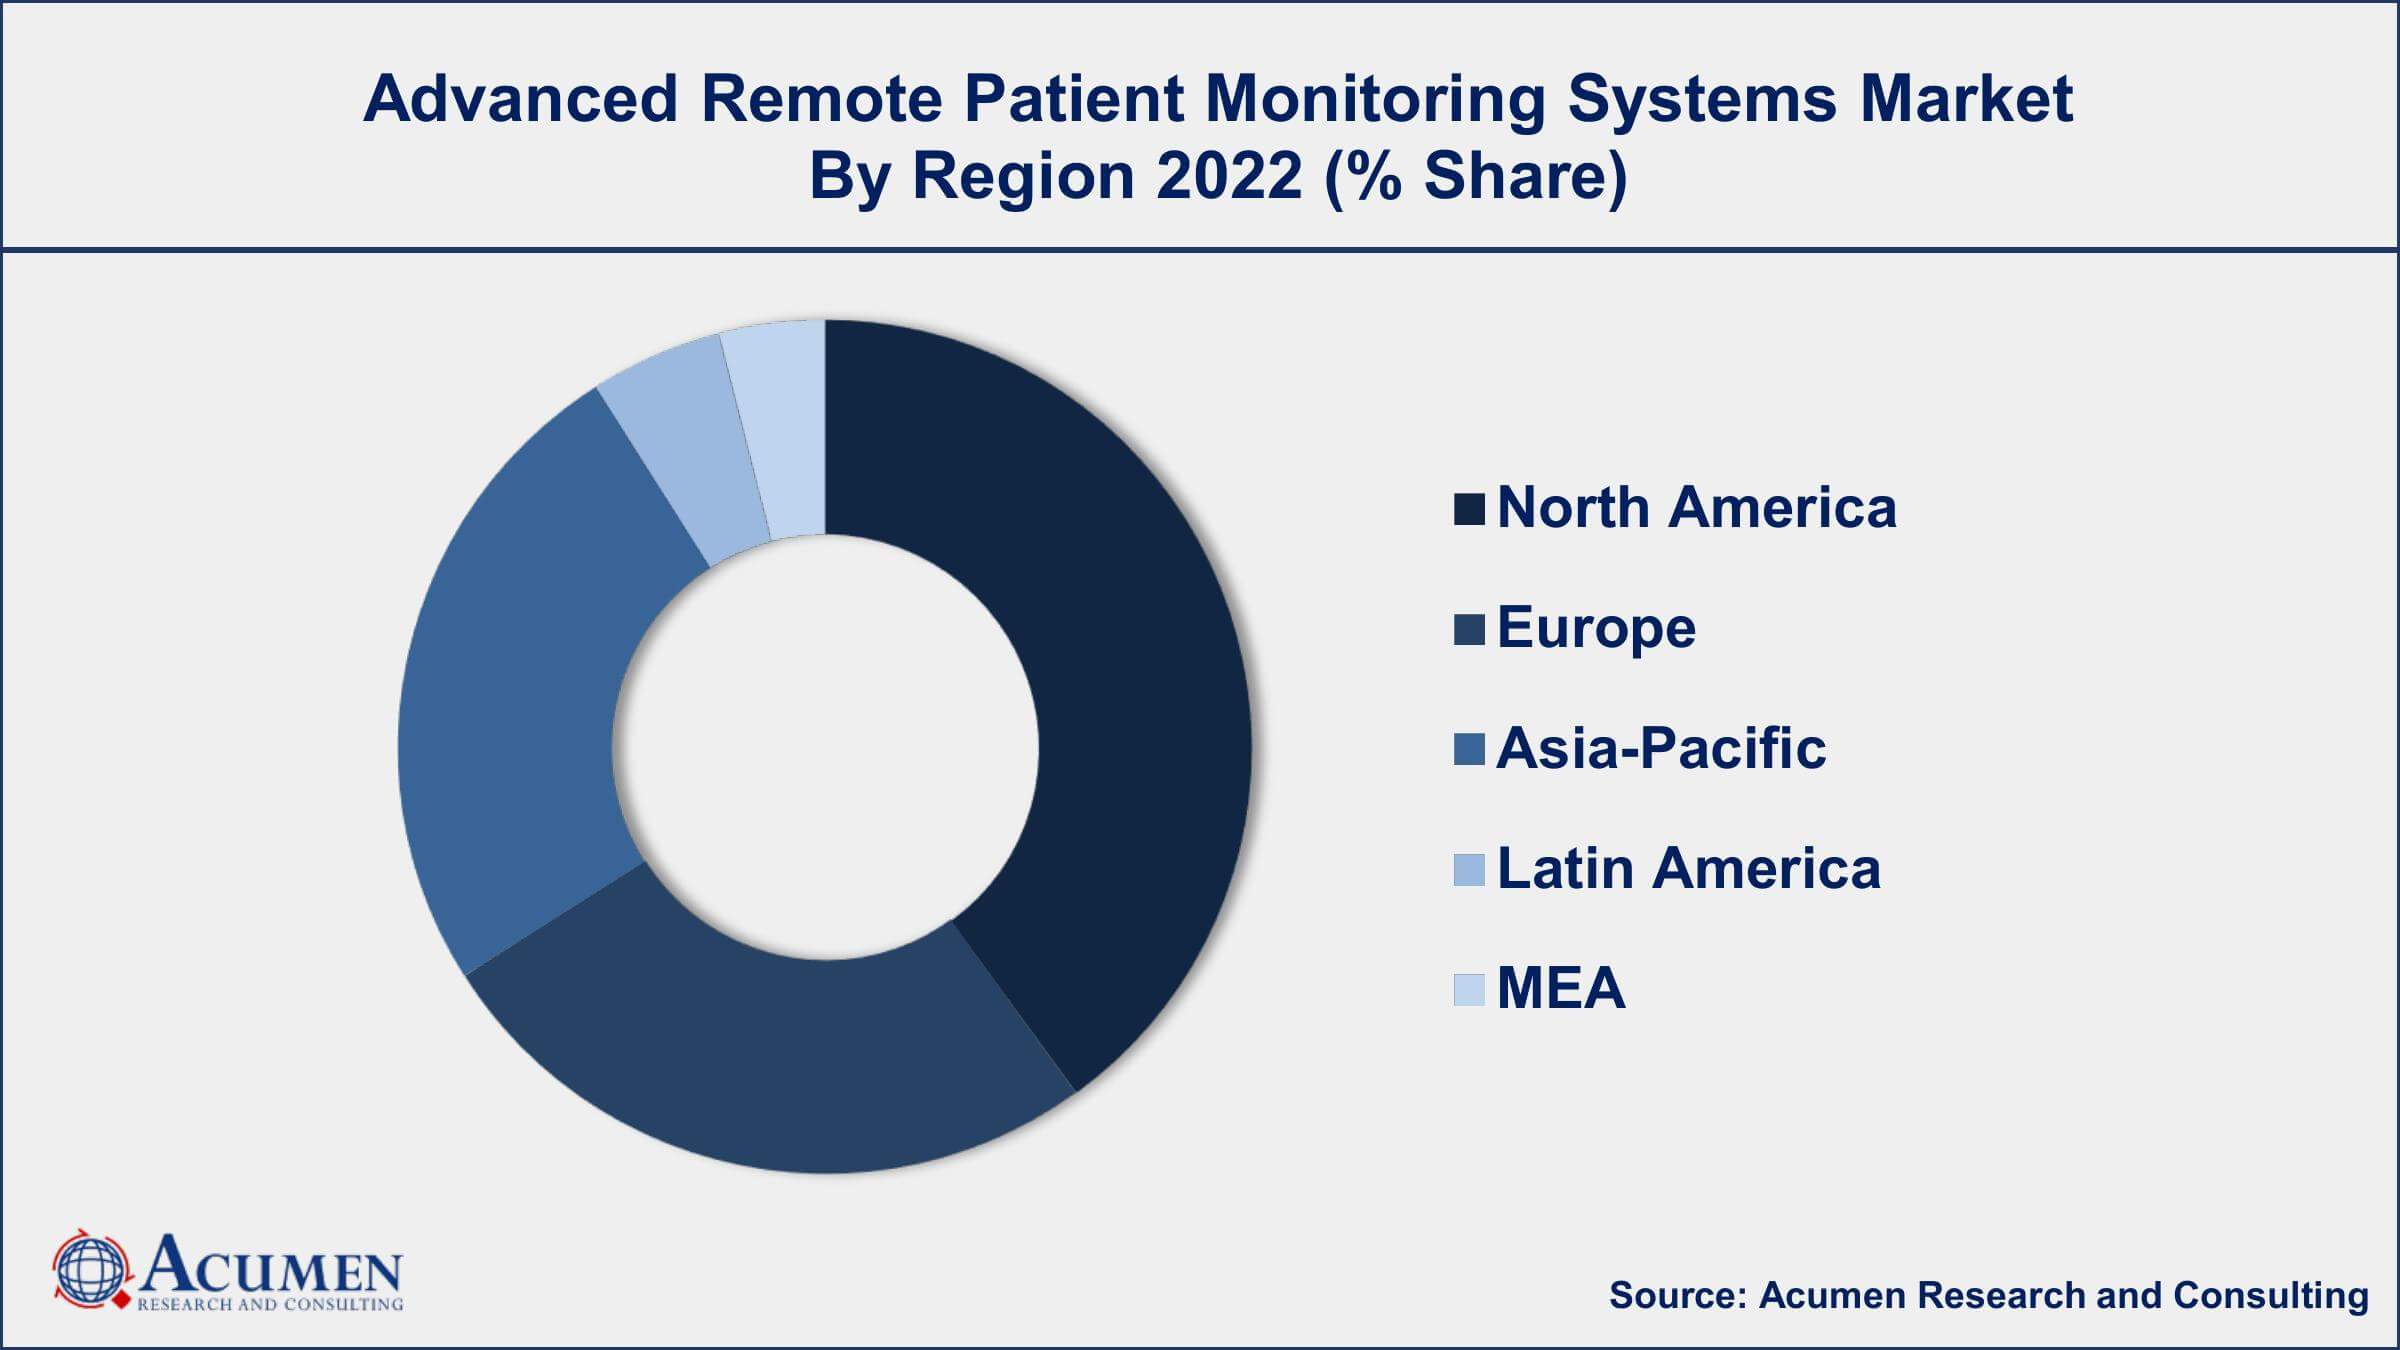 Advanced Remote Patient Monitoring Systems Market Drivers